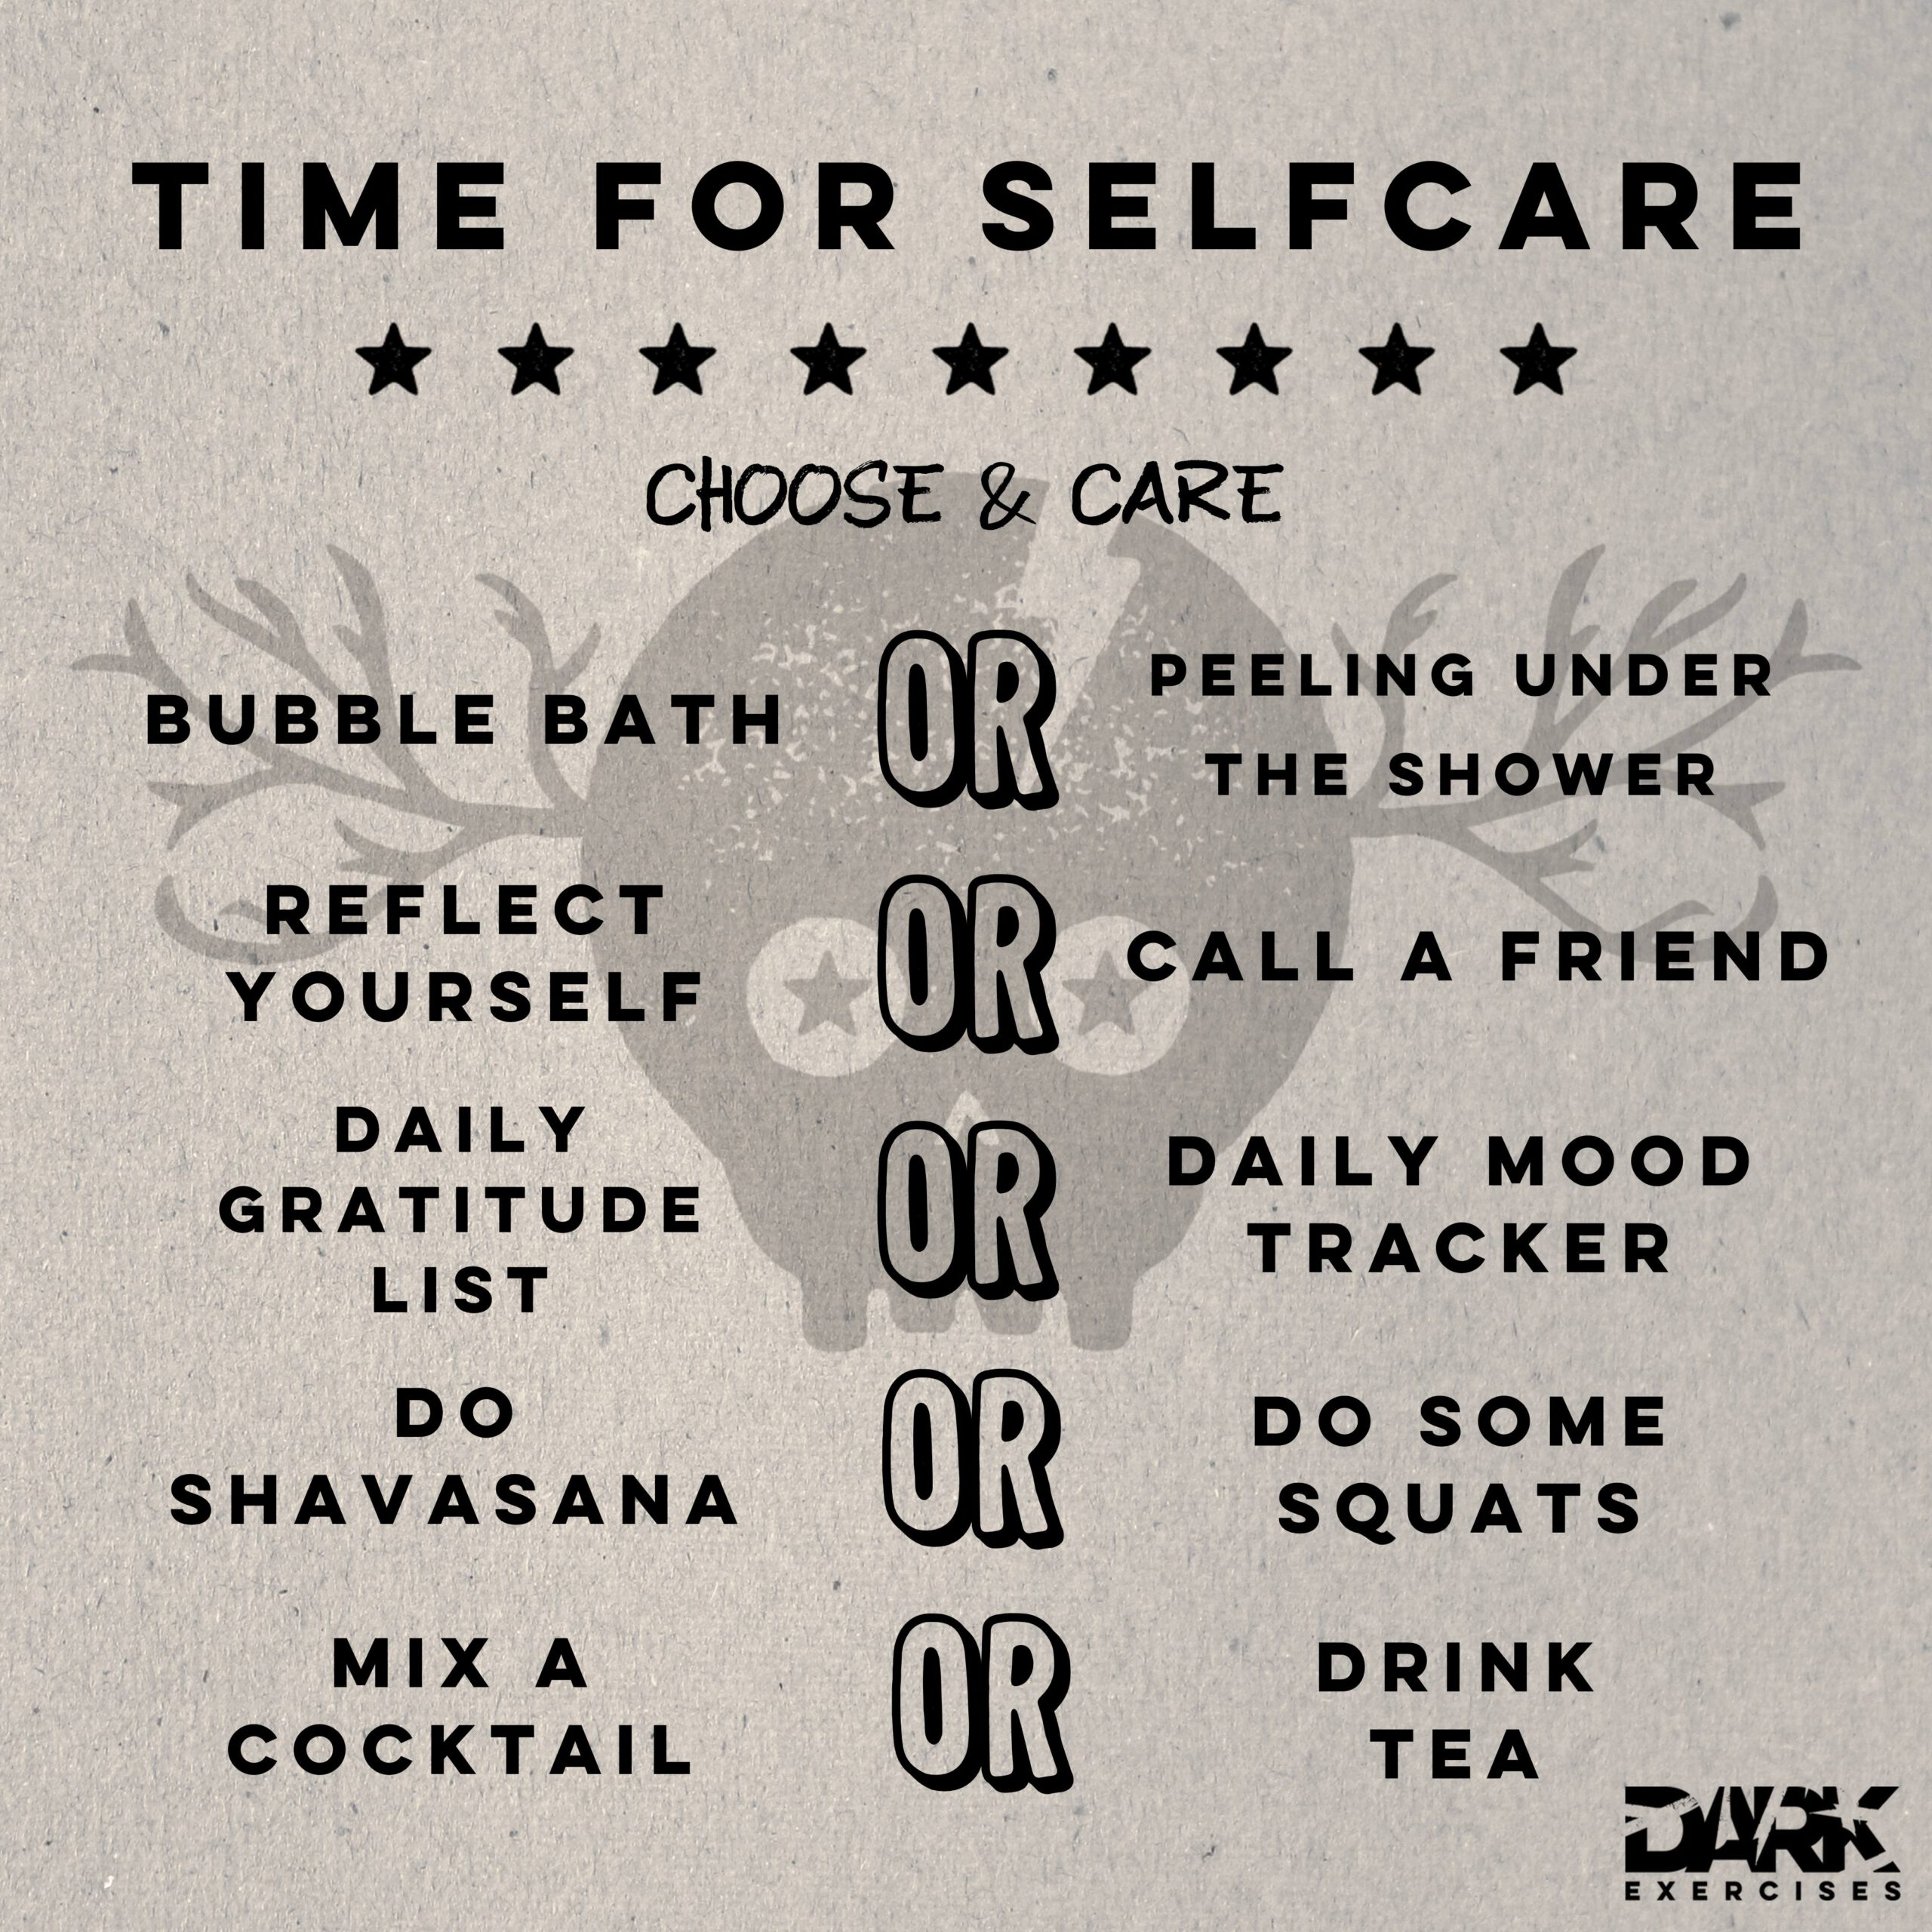 Happiness - Time for Selfcare